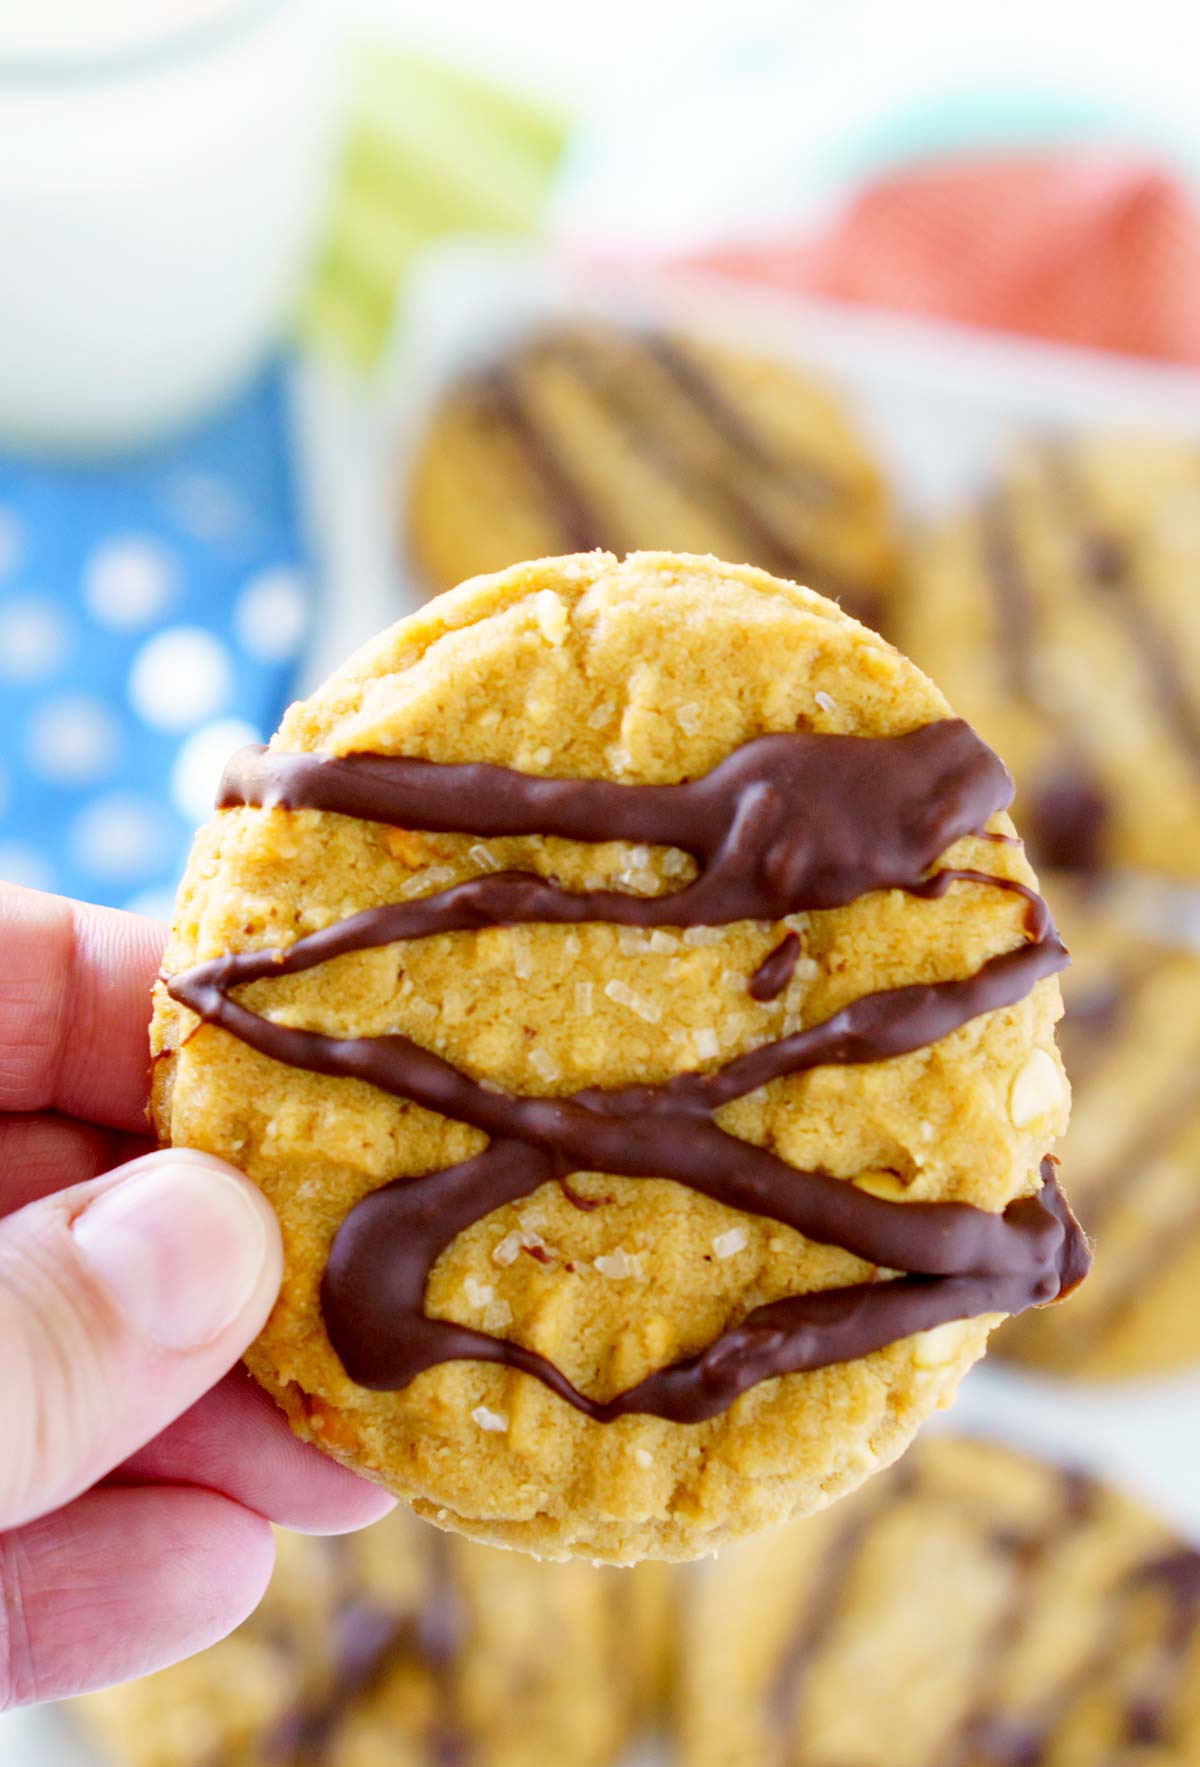 Best Peanut Butter Cookies that are soft and super-nutty!